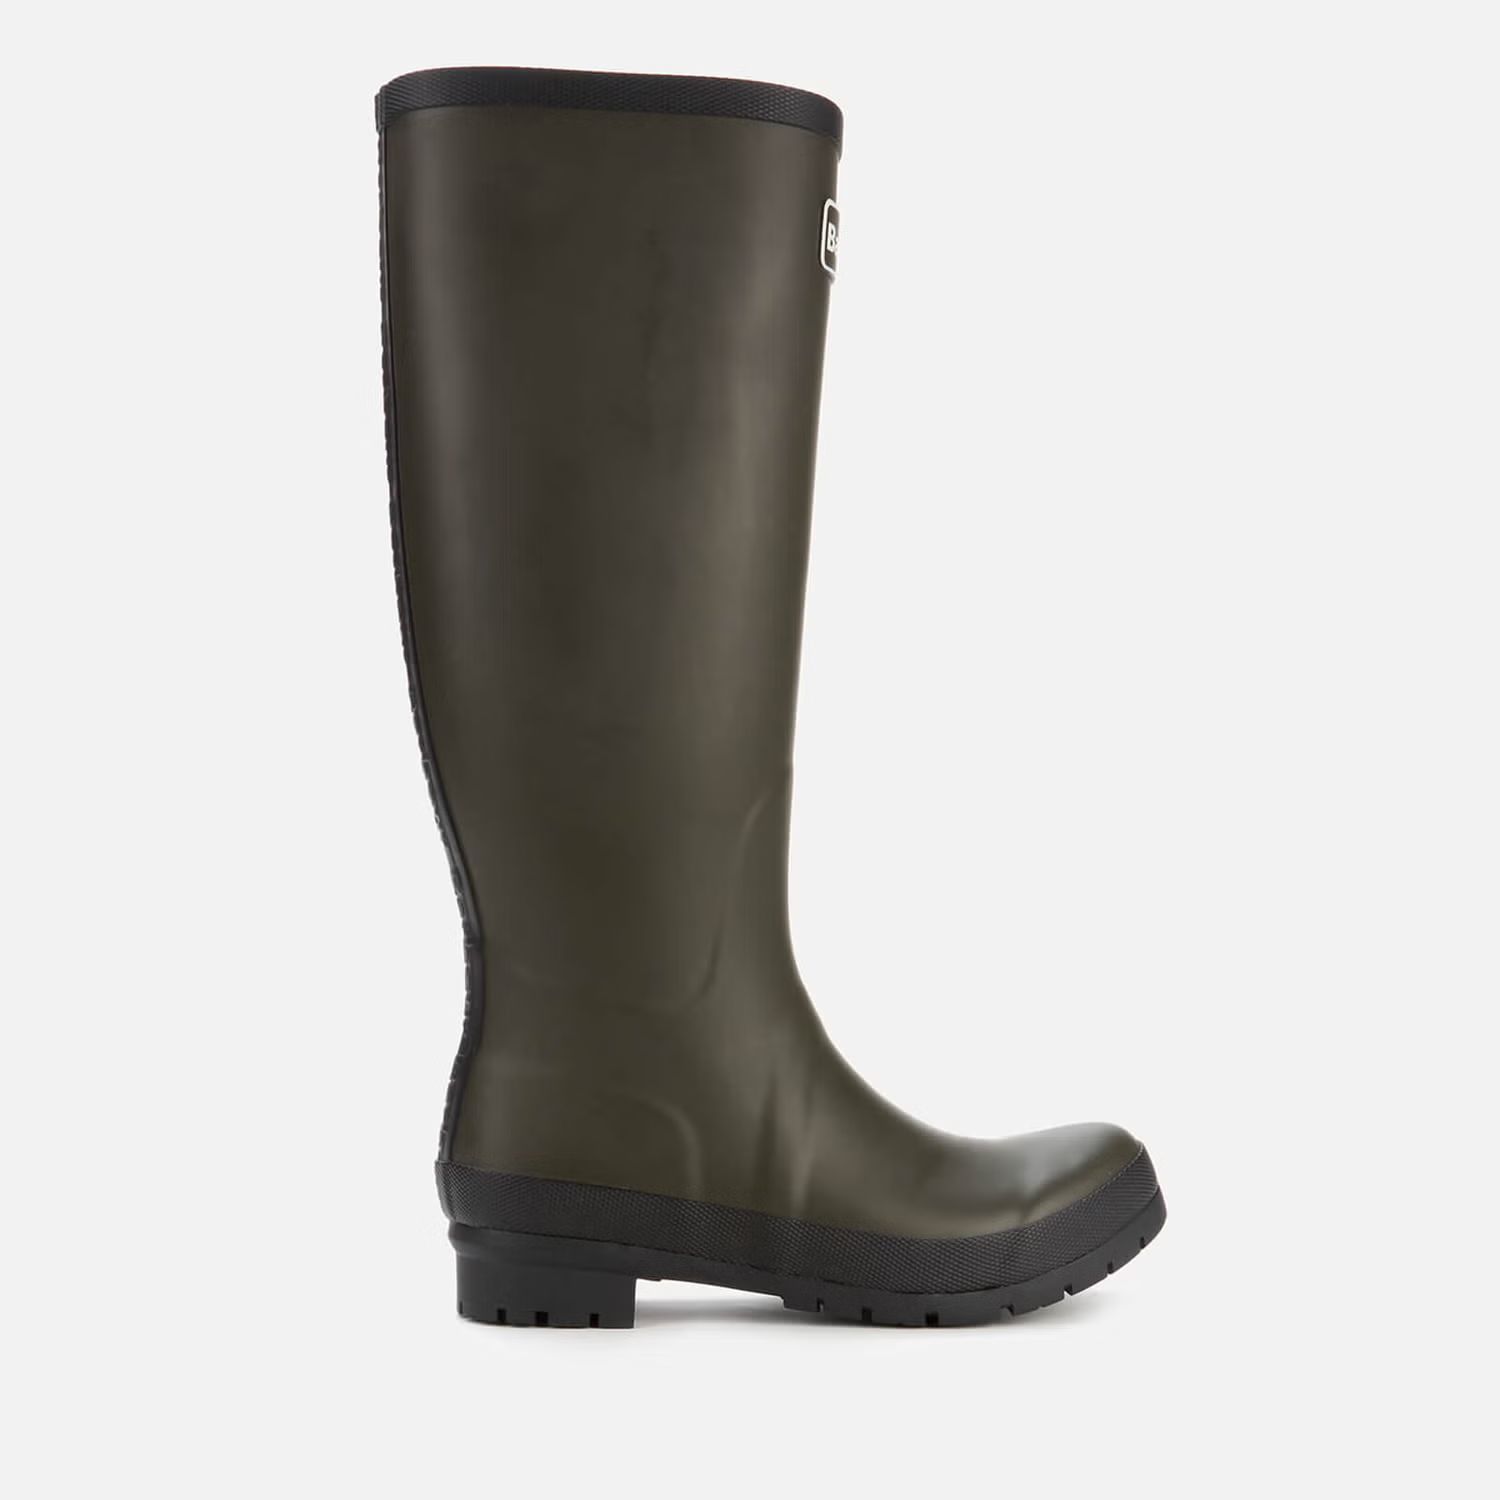 Barbour Women's Abbey Tall Wellies - Olive | The Hut (UK)